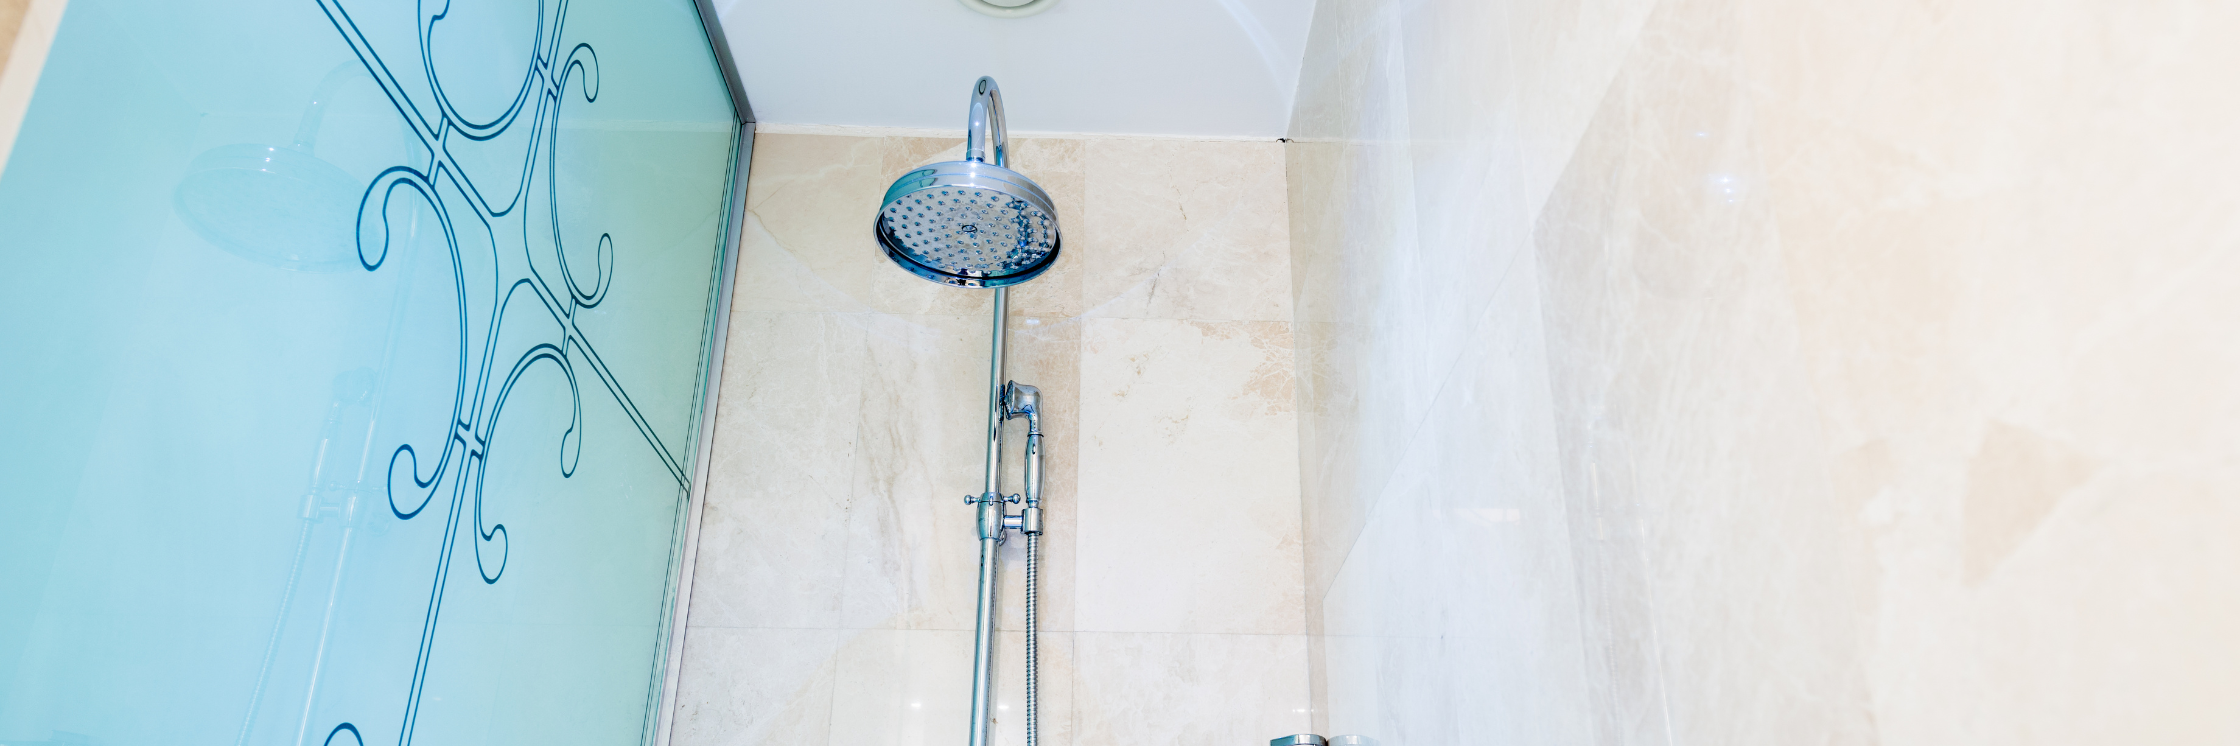 The Top 5 Brands for Showerhead Replacement